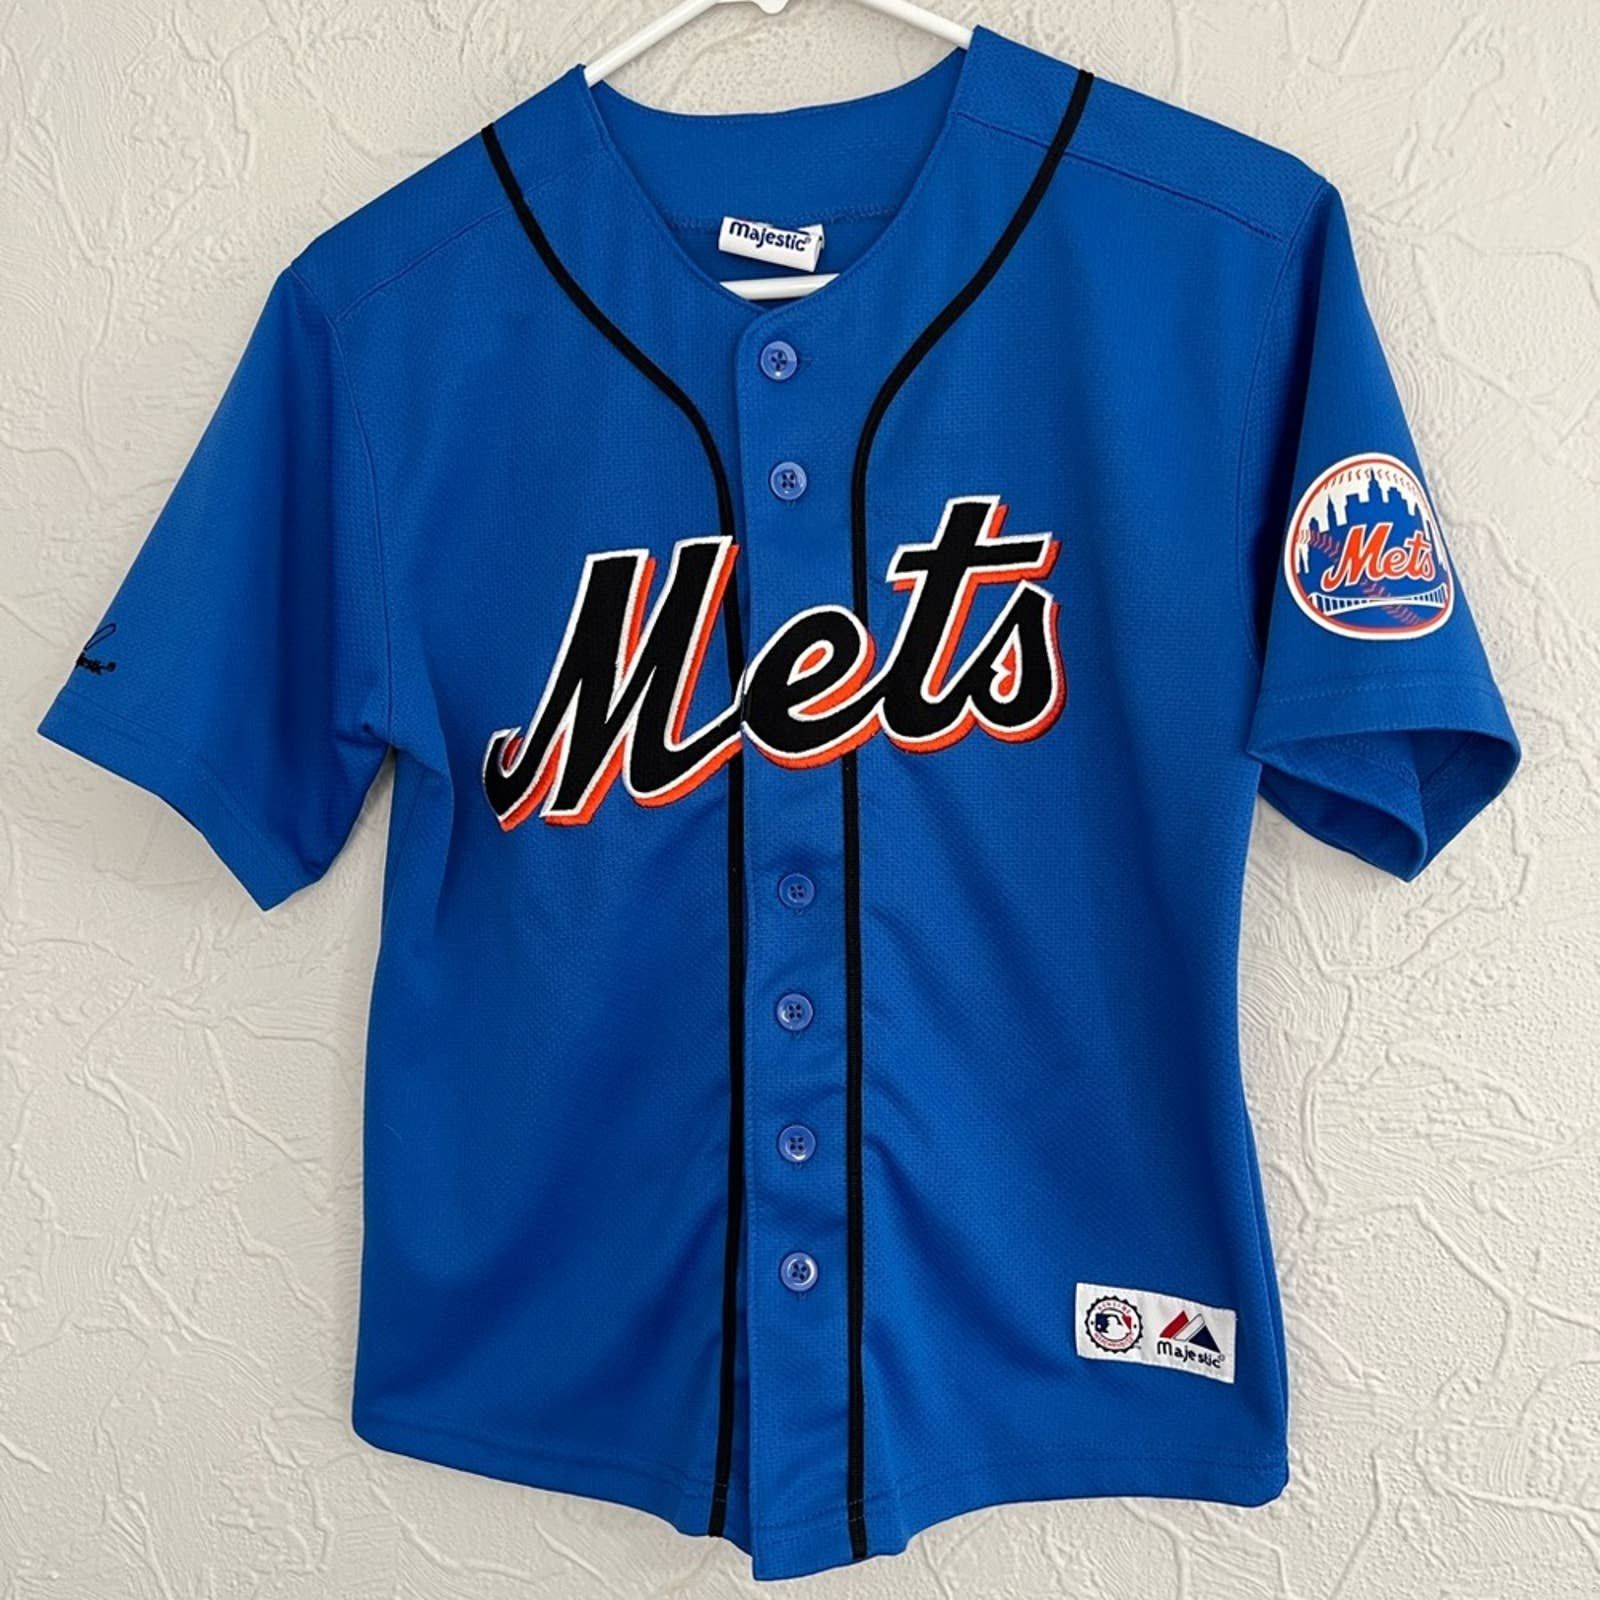 Majestic Authentic Majestic David Wright Mets Jersey L Youth Mets